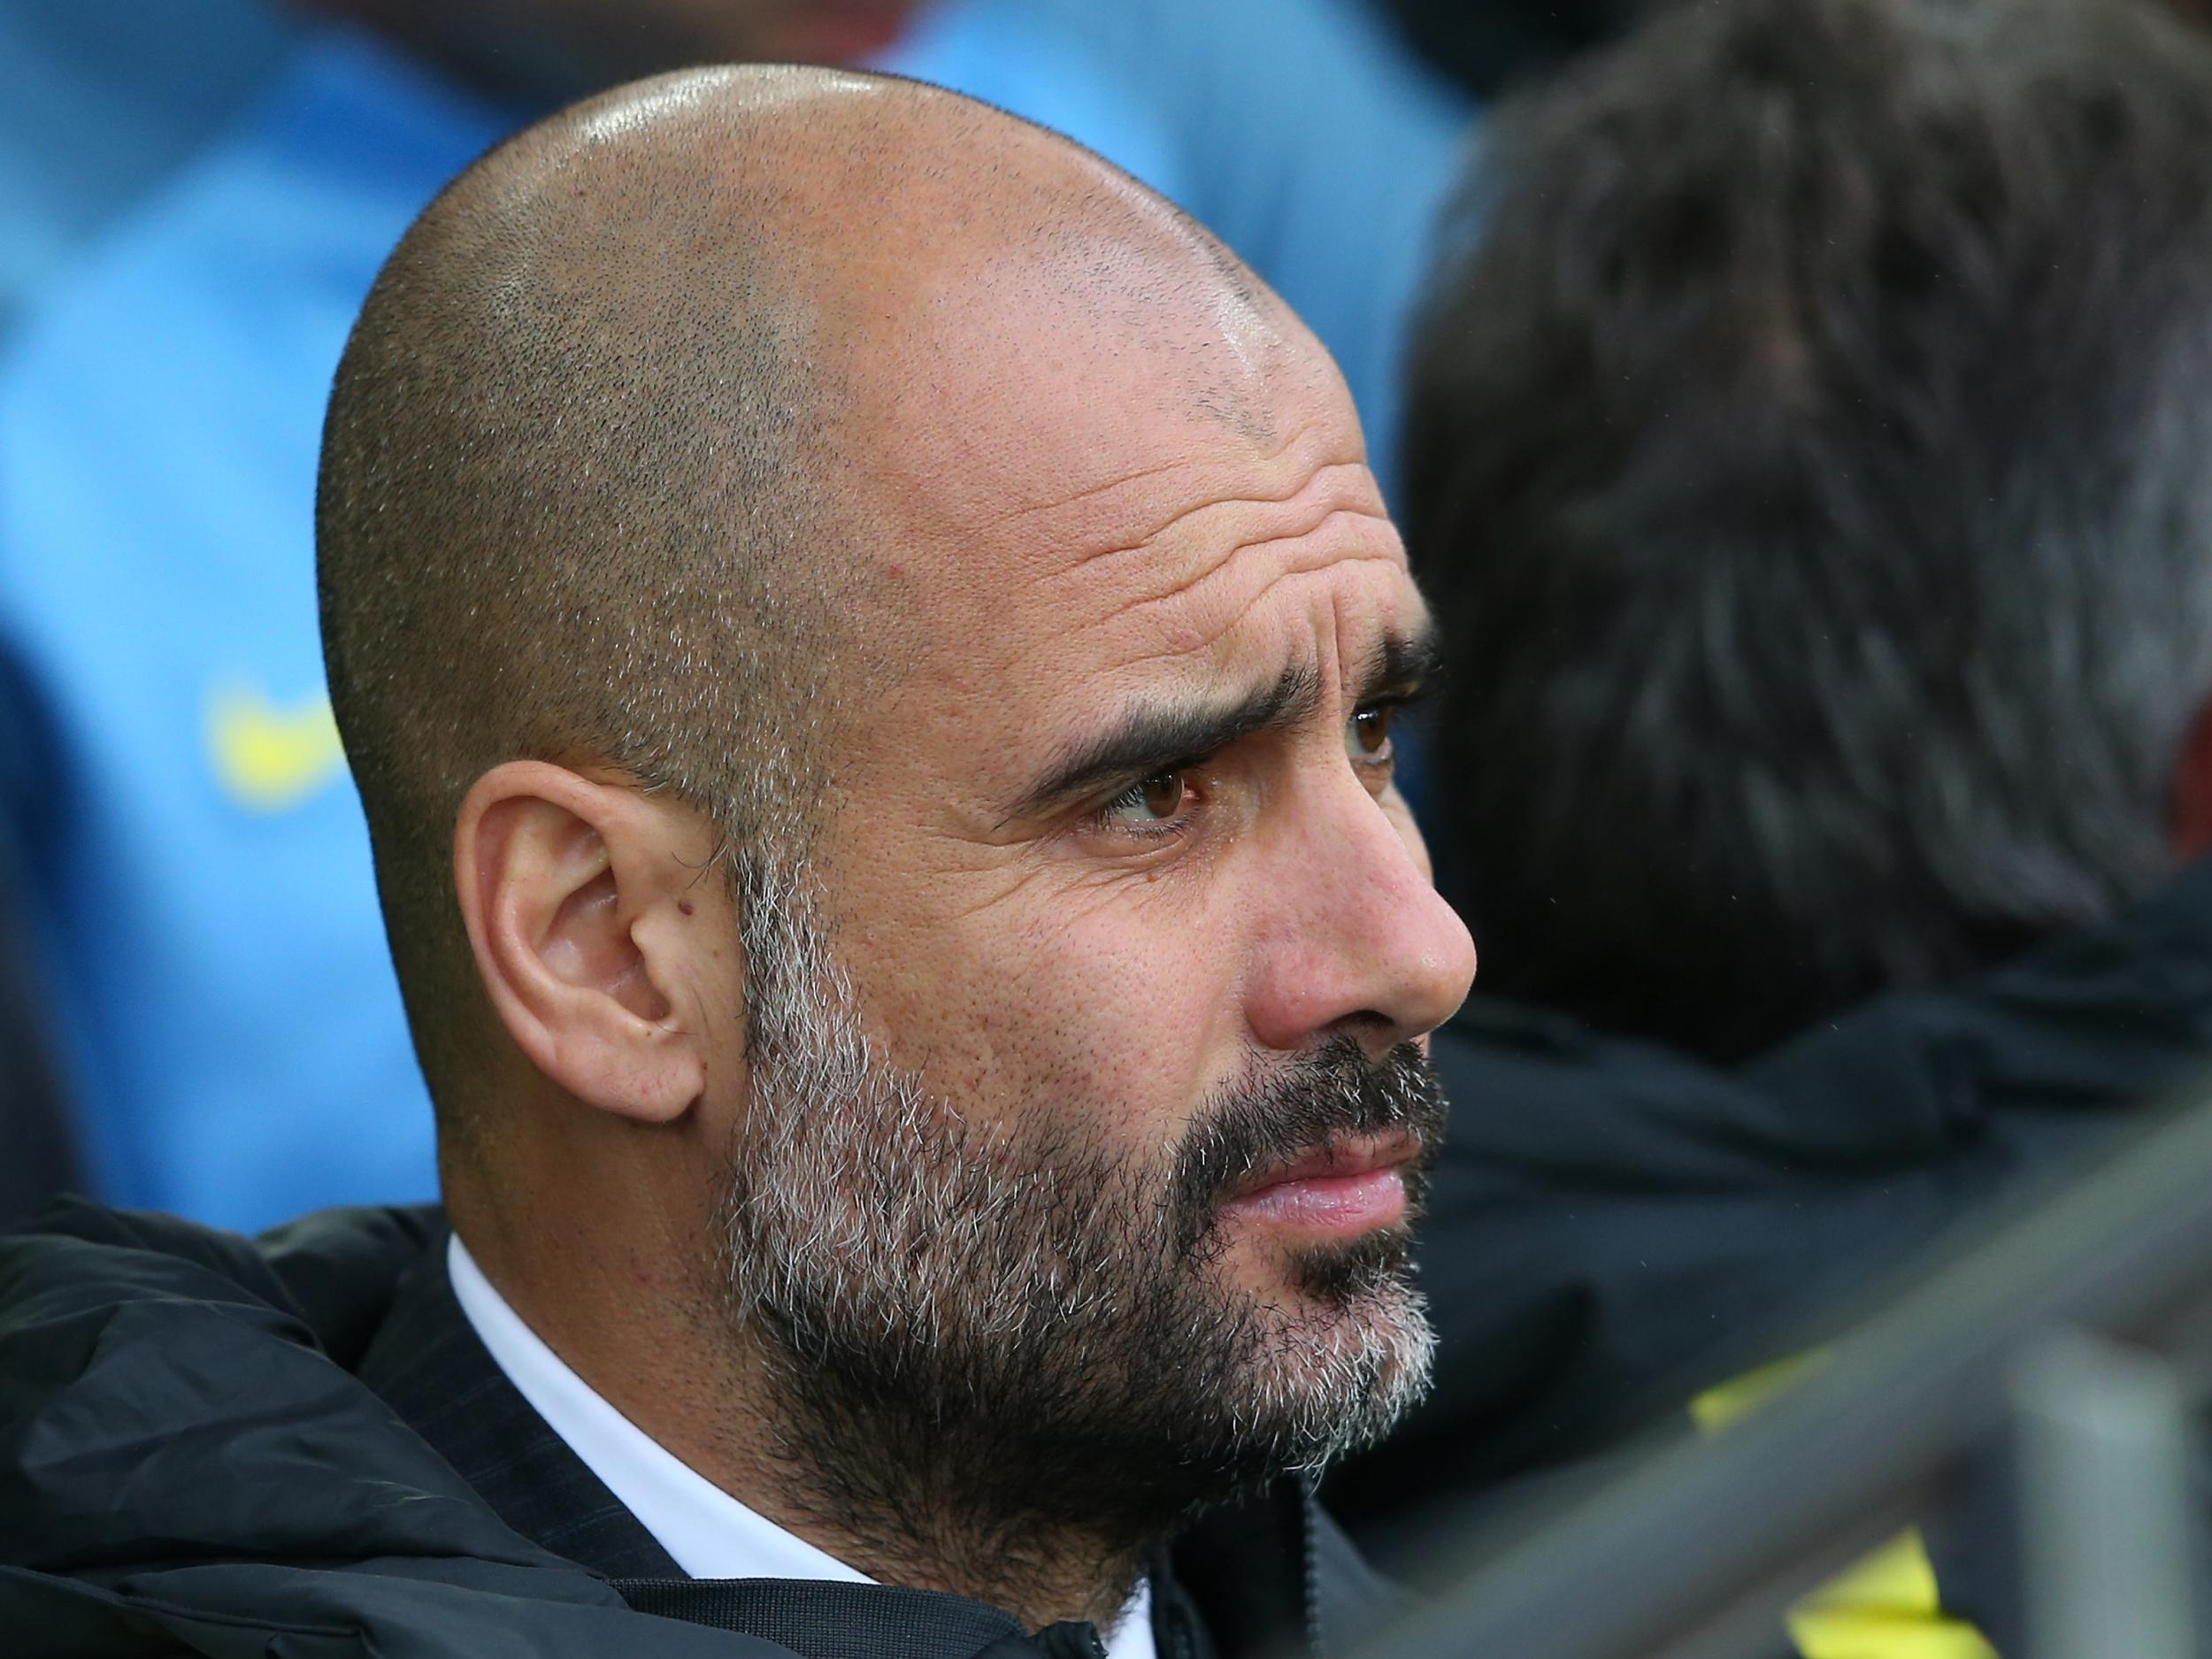 Guardiola suggested his brilliance was exaggerated by the media